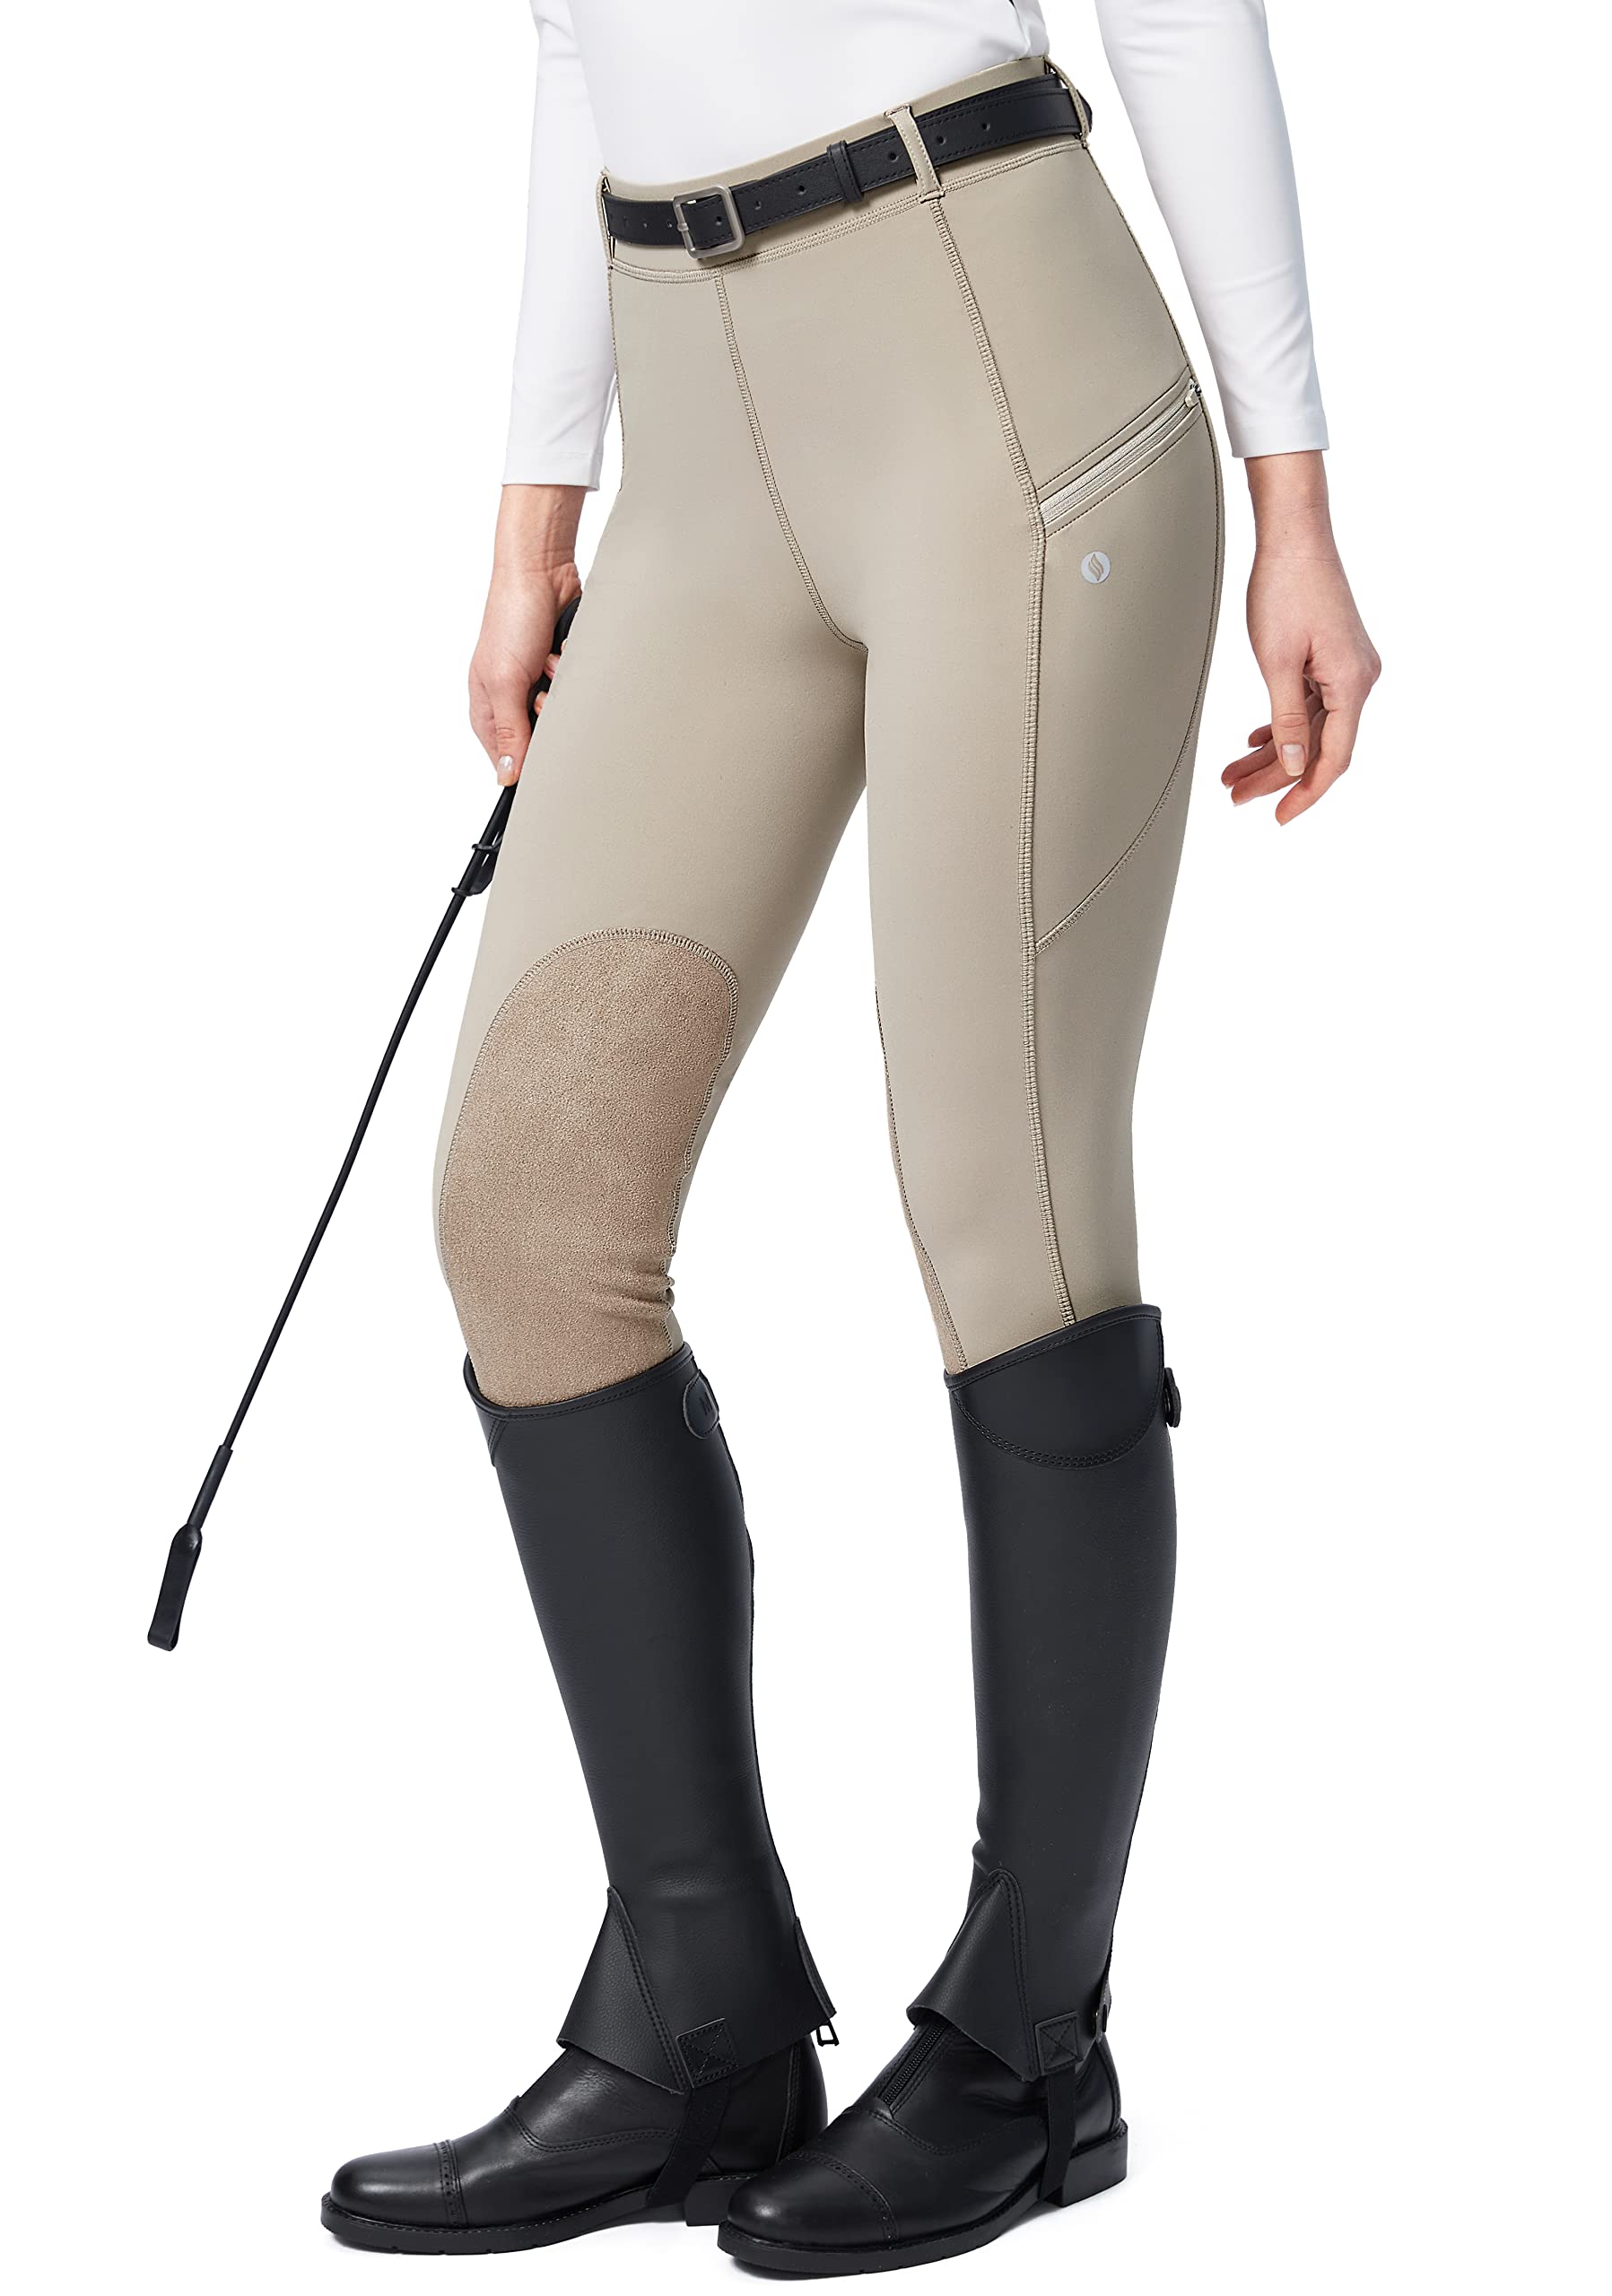  FunRiding-Women Horse Riding Tights with Pockets Equestrian  Breeches Horseback Riding Pants (Gray, XS) : Clothing, Shoes & Jewelry